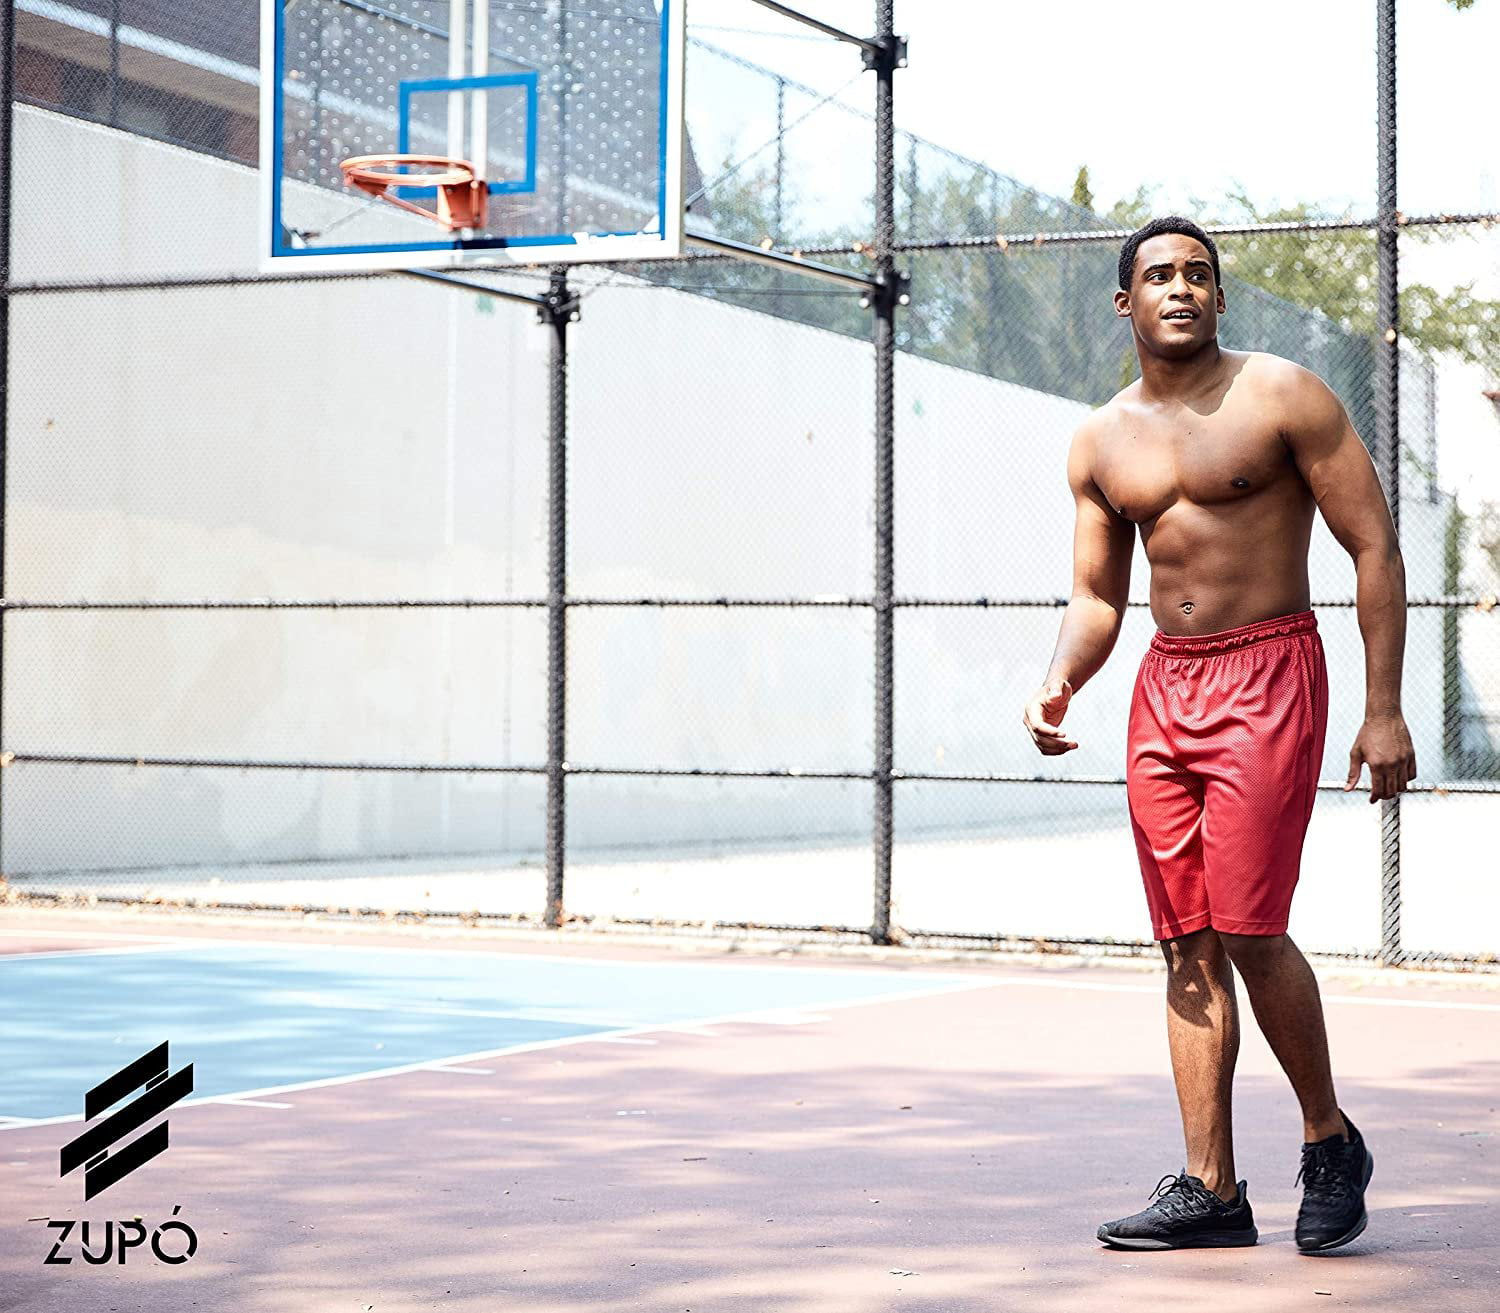 Men's Active Performance Quick-Dry Athletic Workout Gym Knit Basketball Shorts with Pockets Zupo 4 Pack